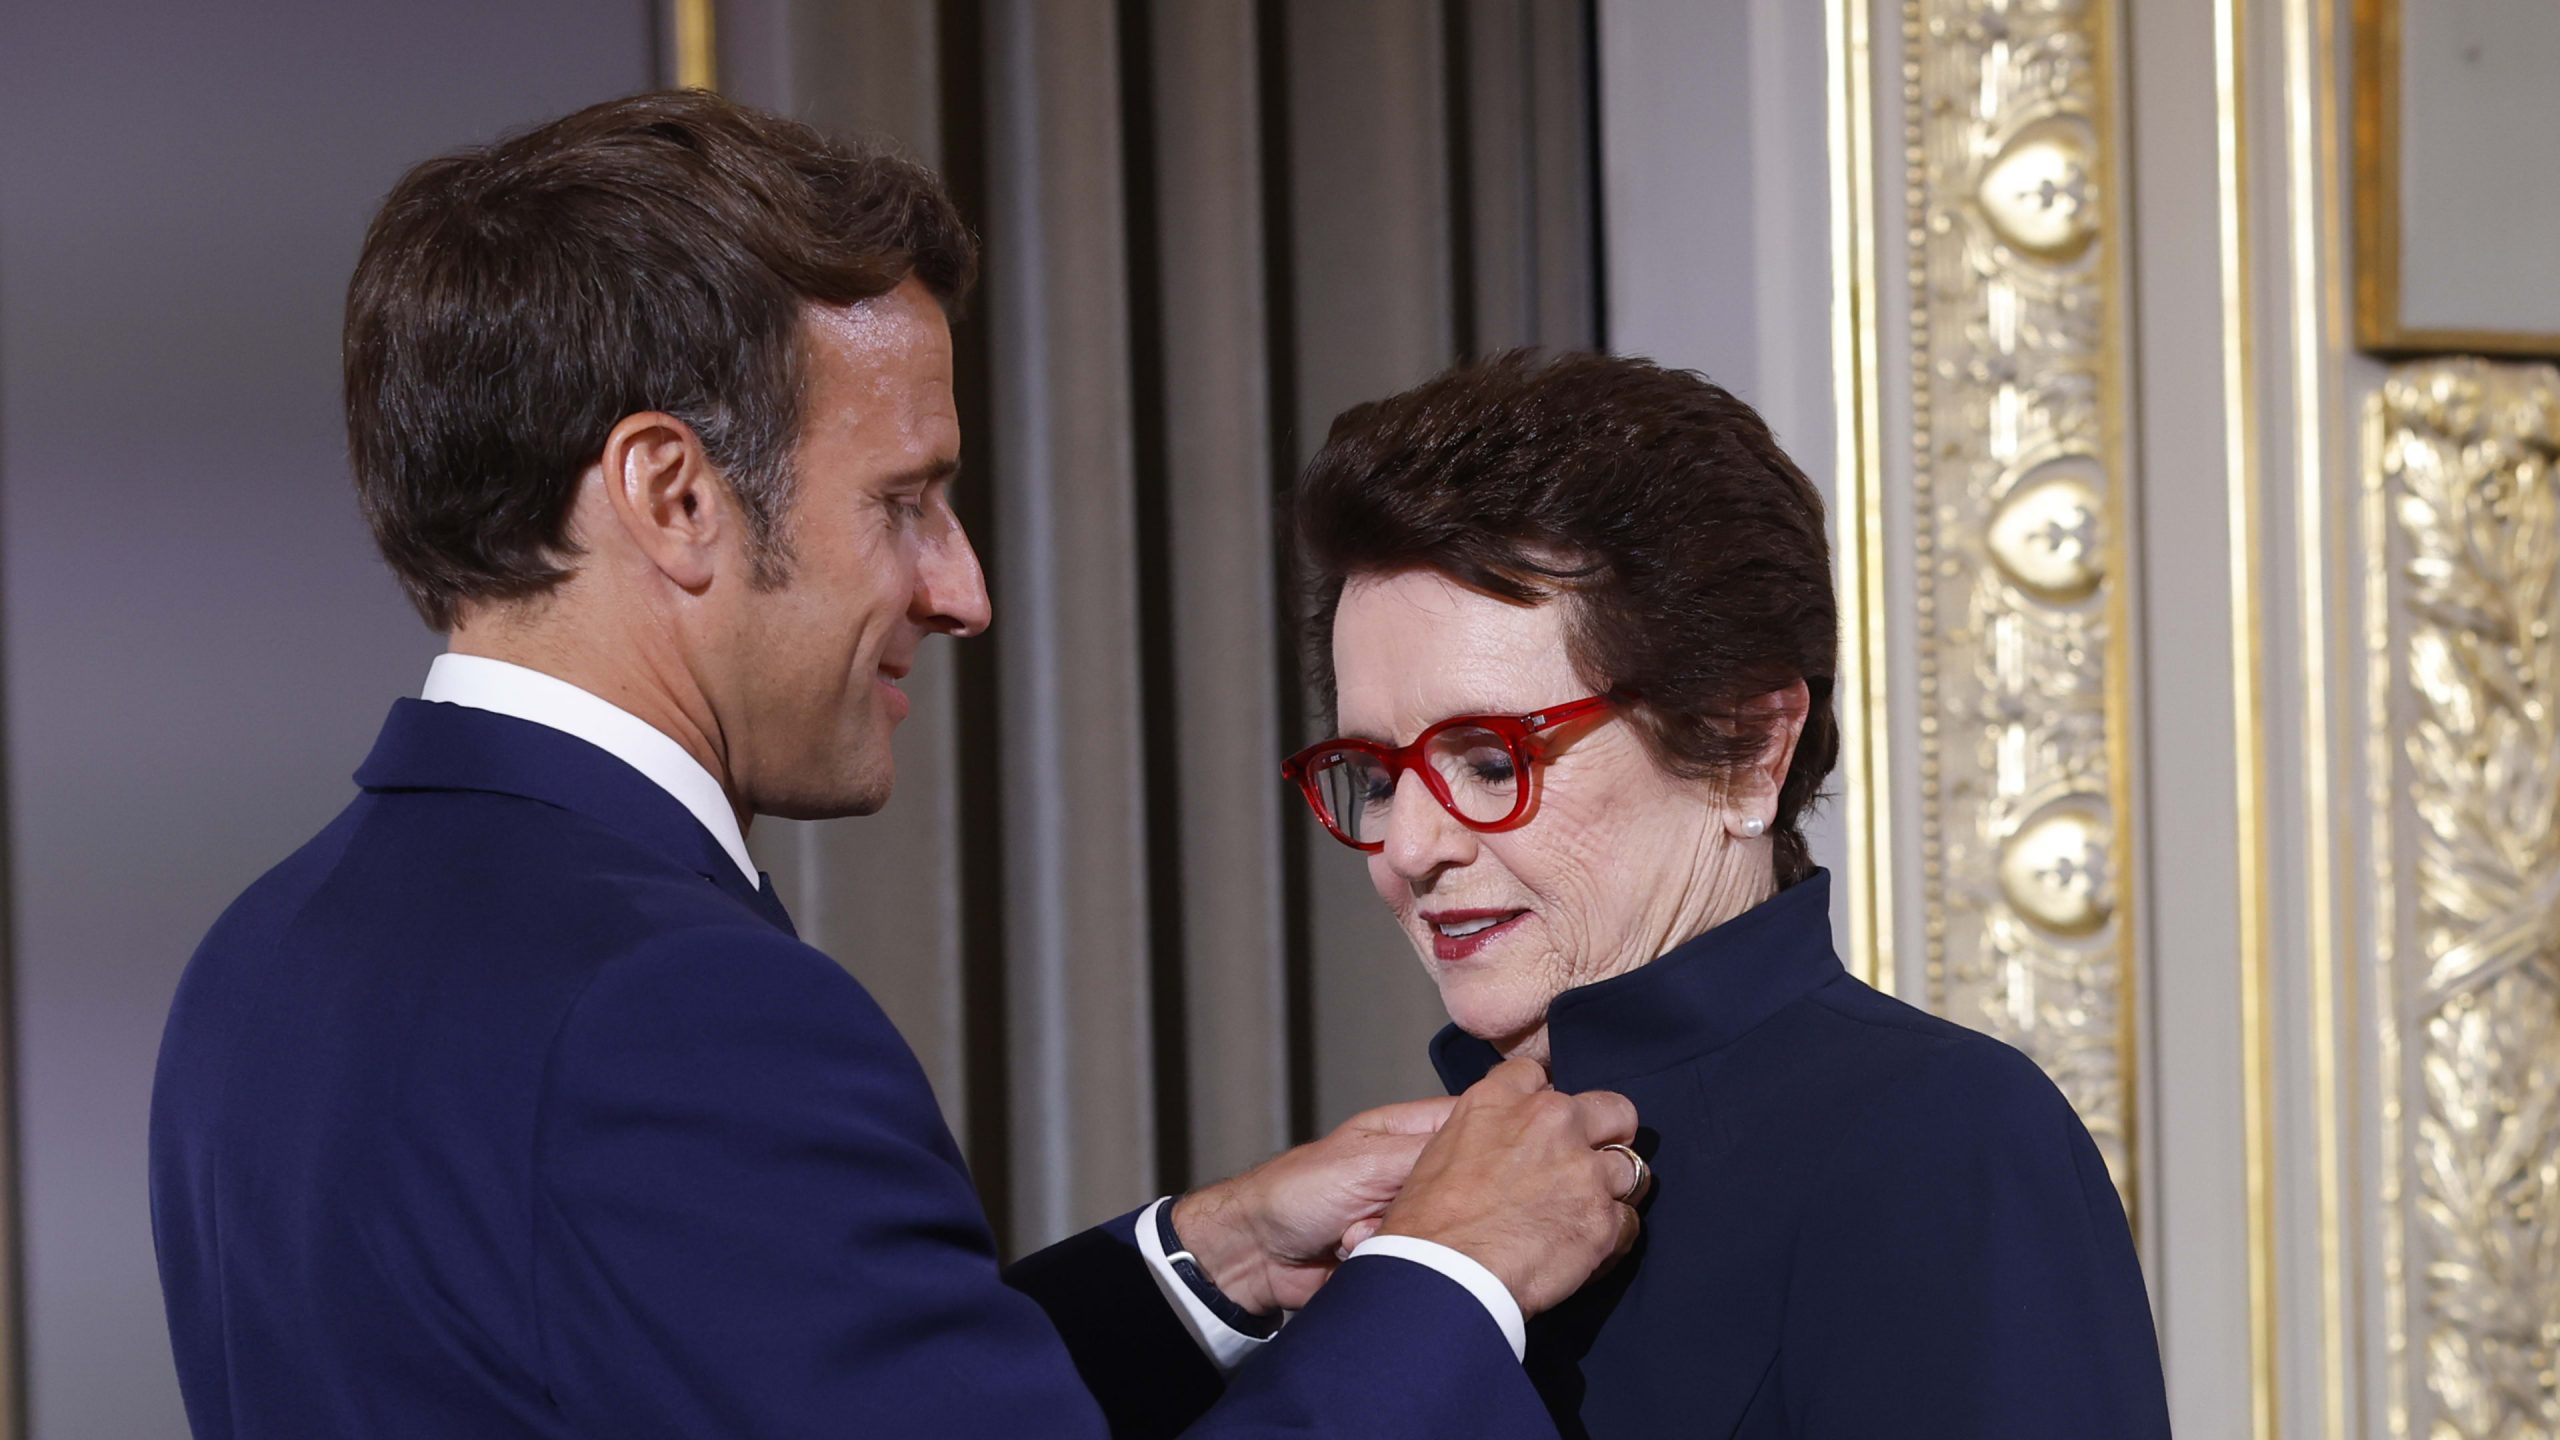 Tennis pro Billie Jean King wants more women’s night matches at French Open